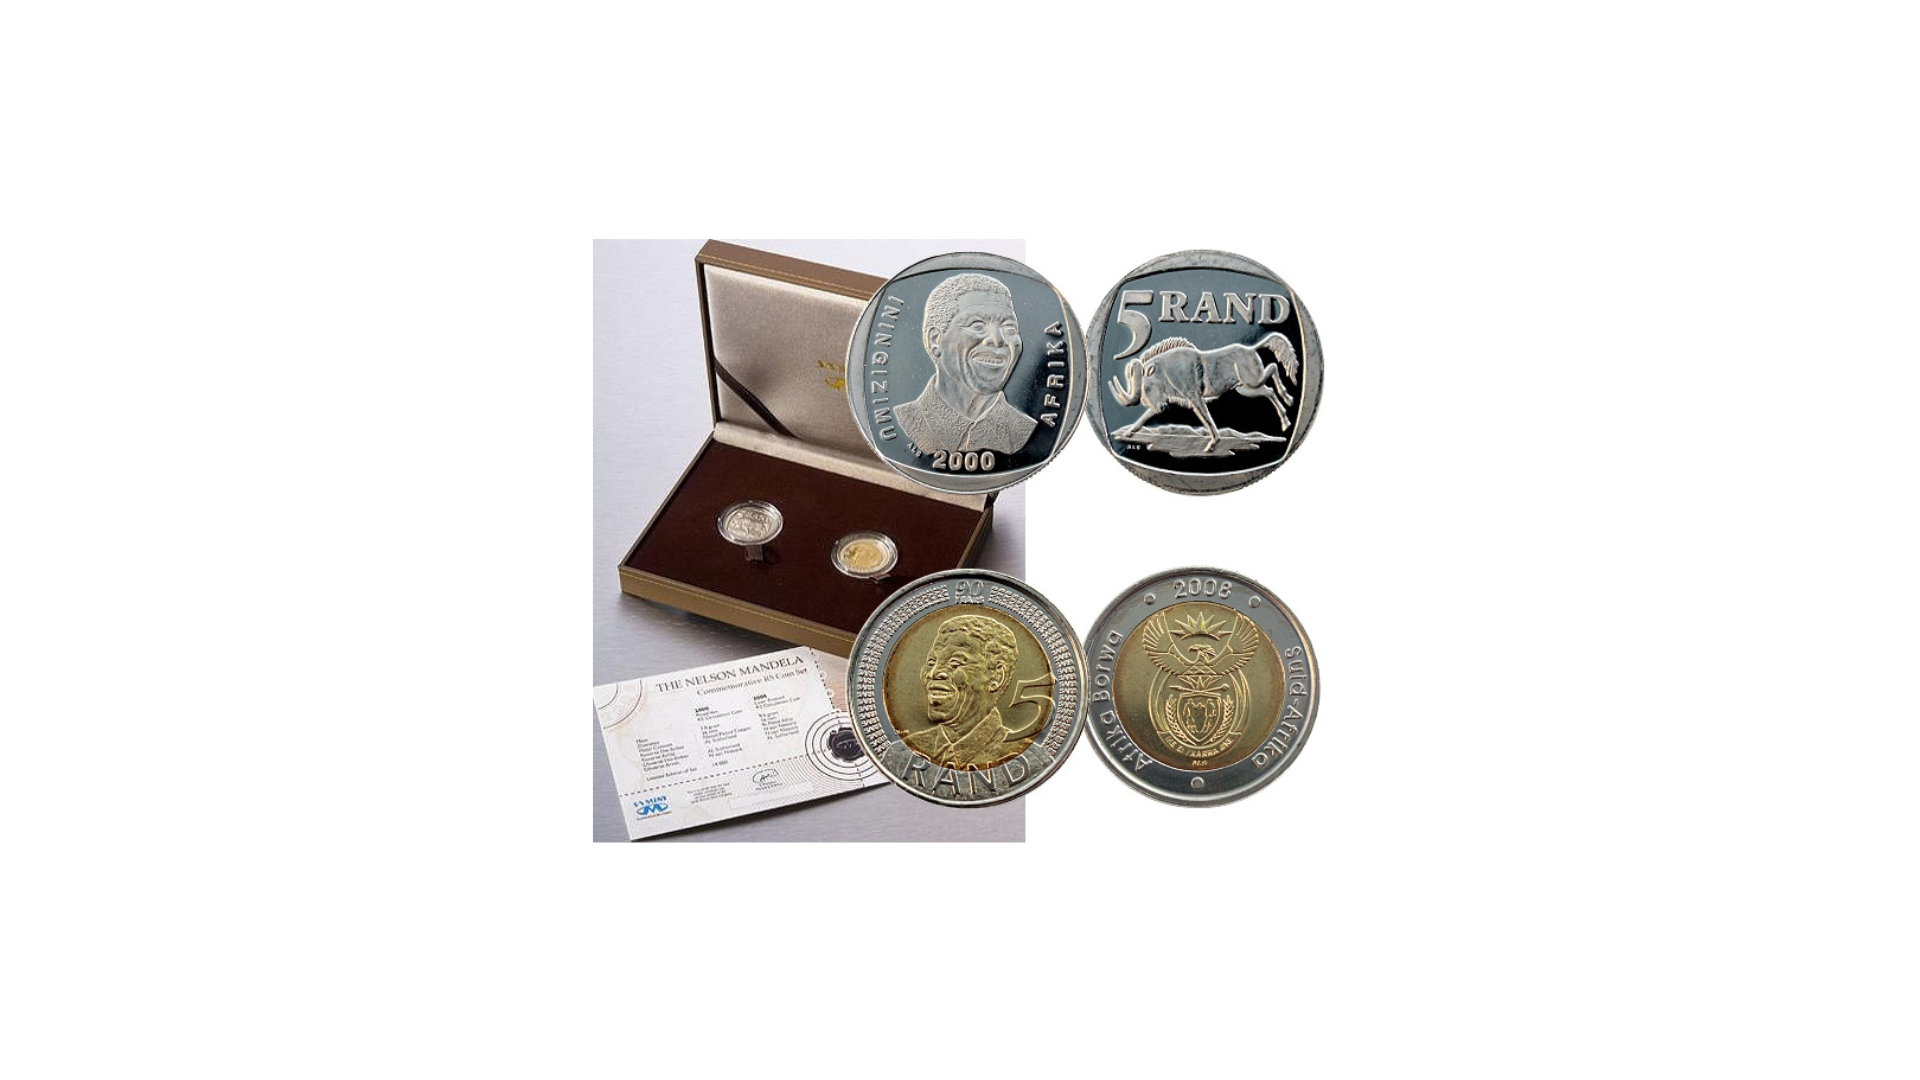 Where can you sell your 2008 Mandela R5 coin